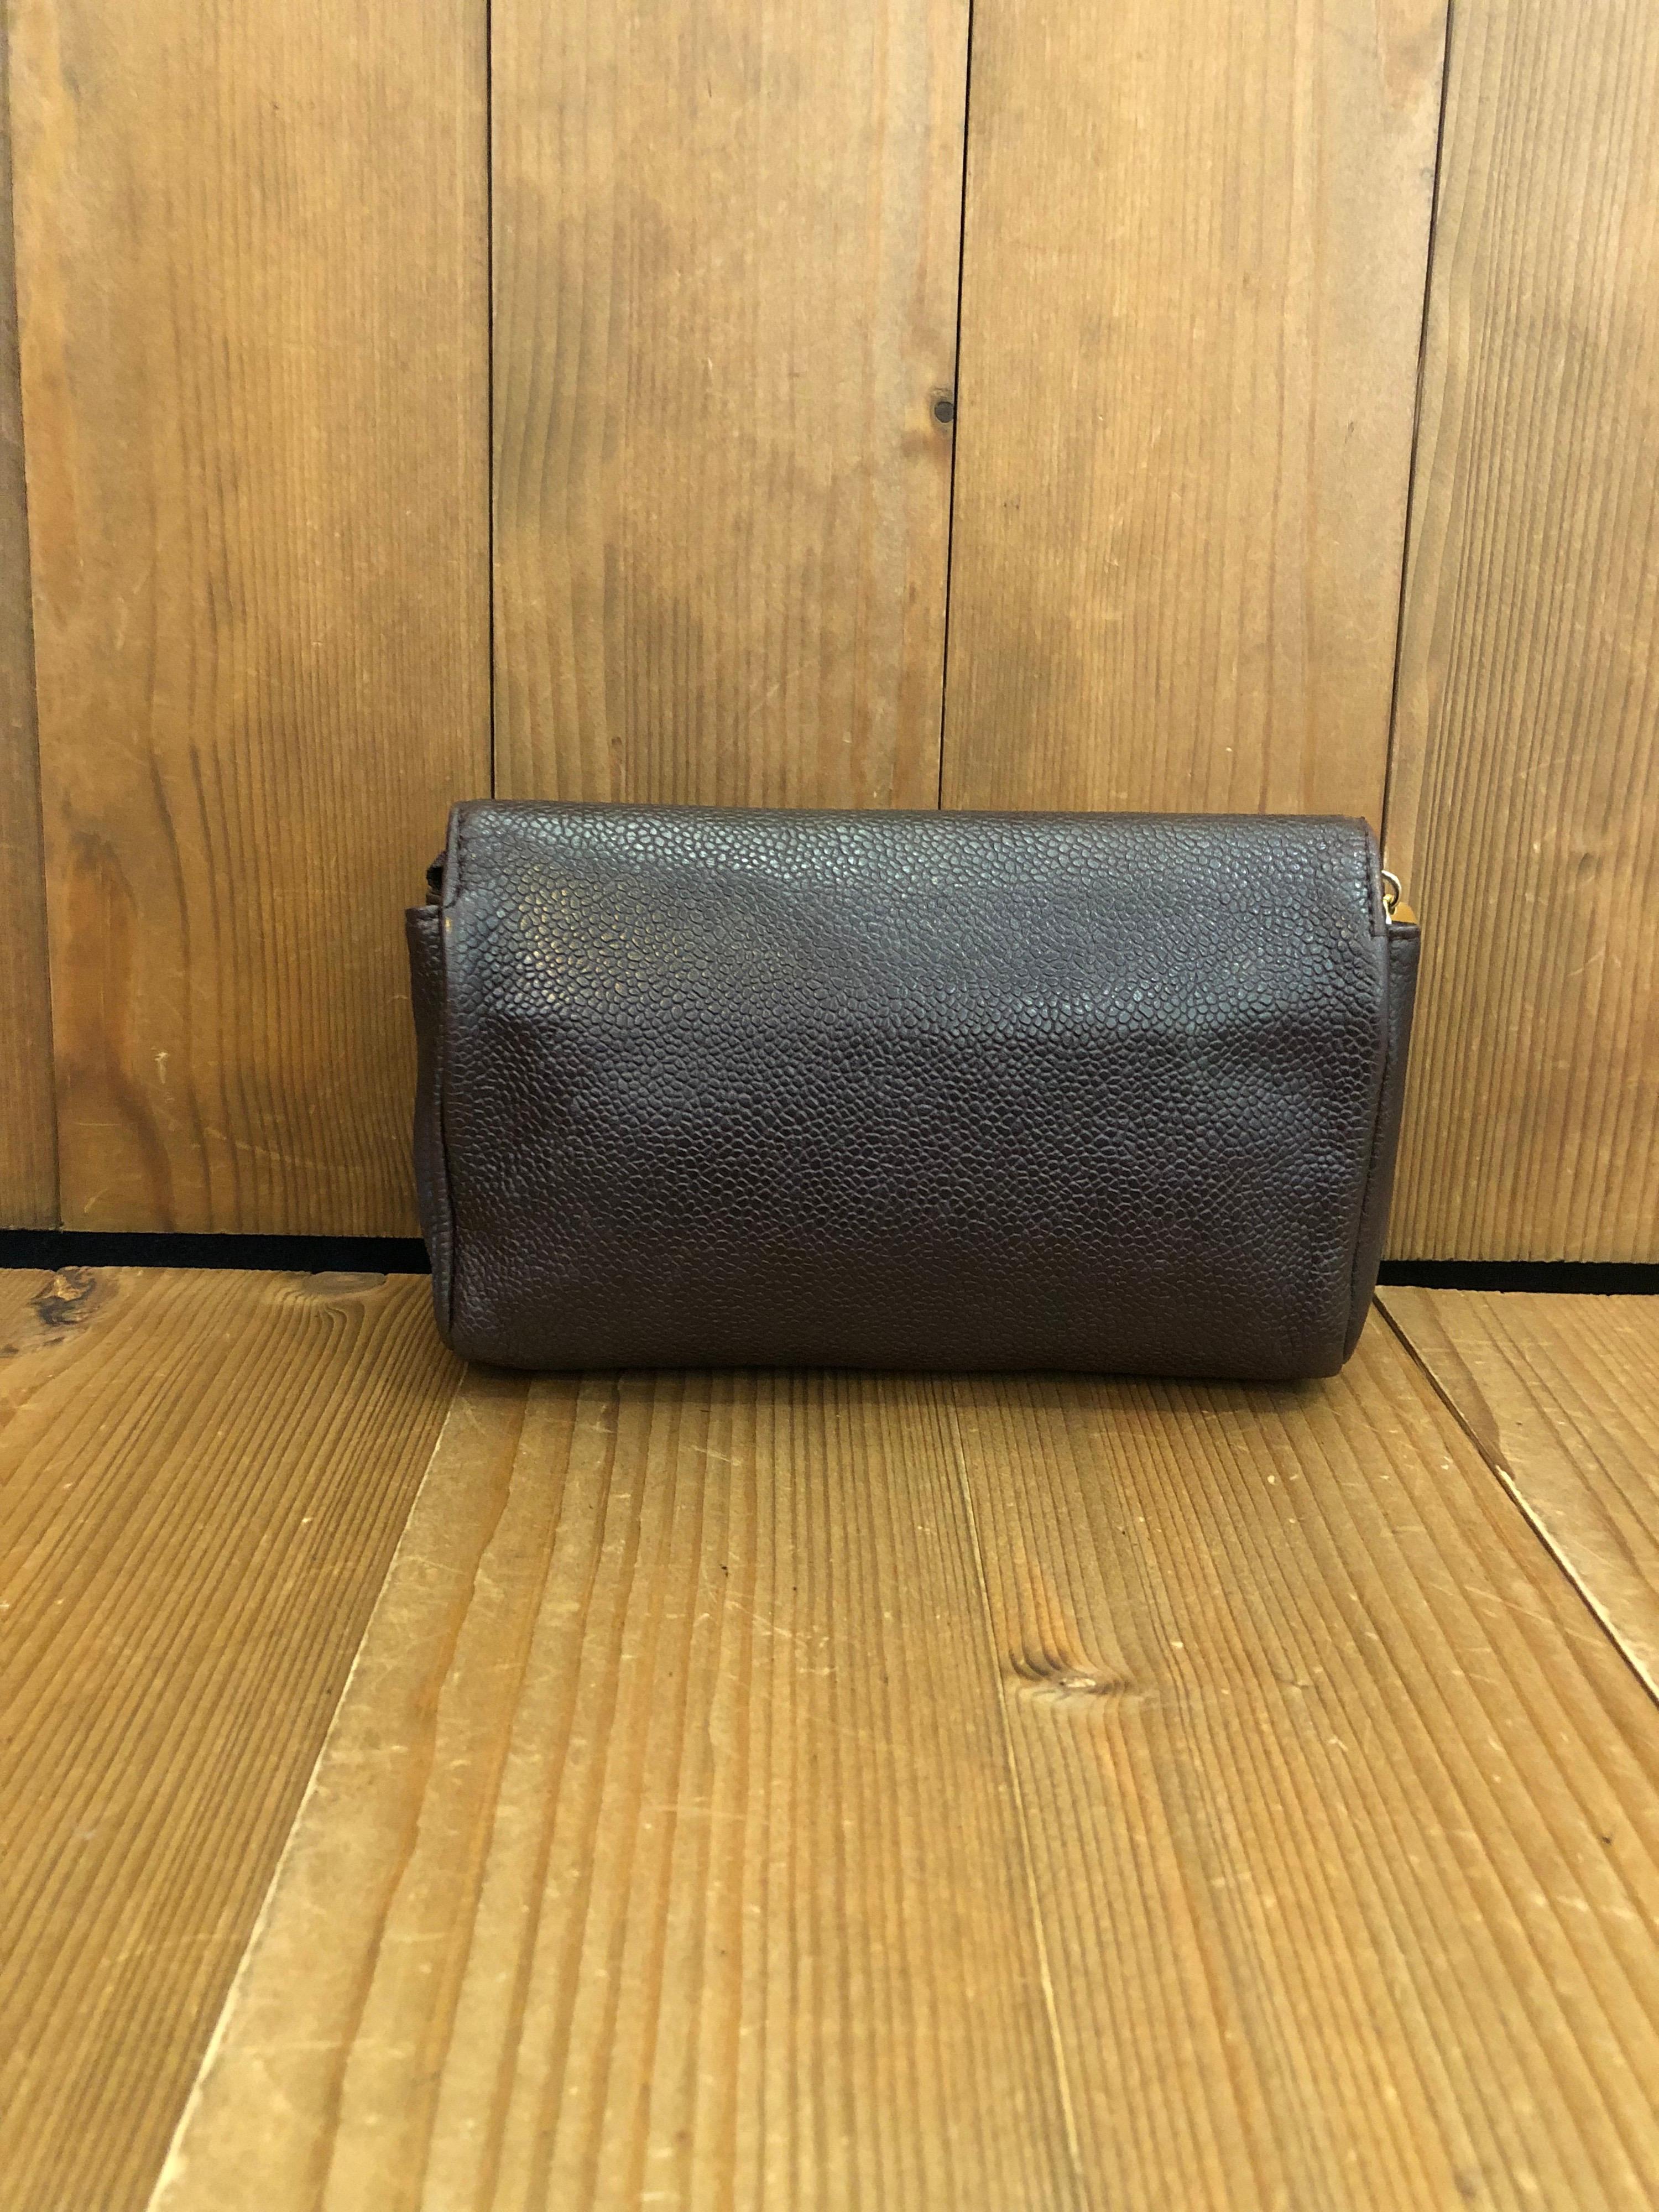 1990s Chanel cosmetic pouch/clutch in dark brown caviar leather with lambskin leather interior featuring a minor under the flap. Made in Italy. Serial sticker illegible.  Measures 6.5 x 4.5 x 2 inches (fits plus sized iPhone). 

Condition: Some